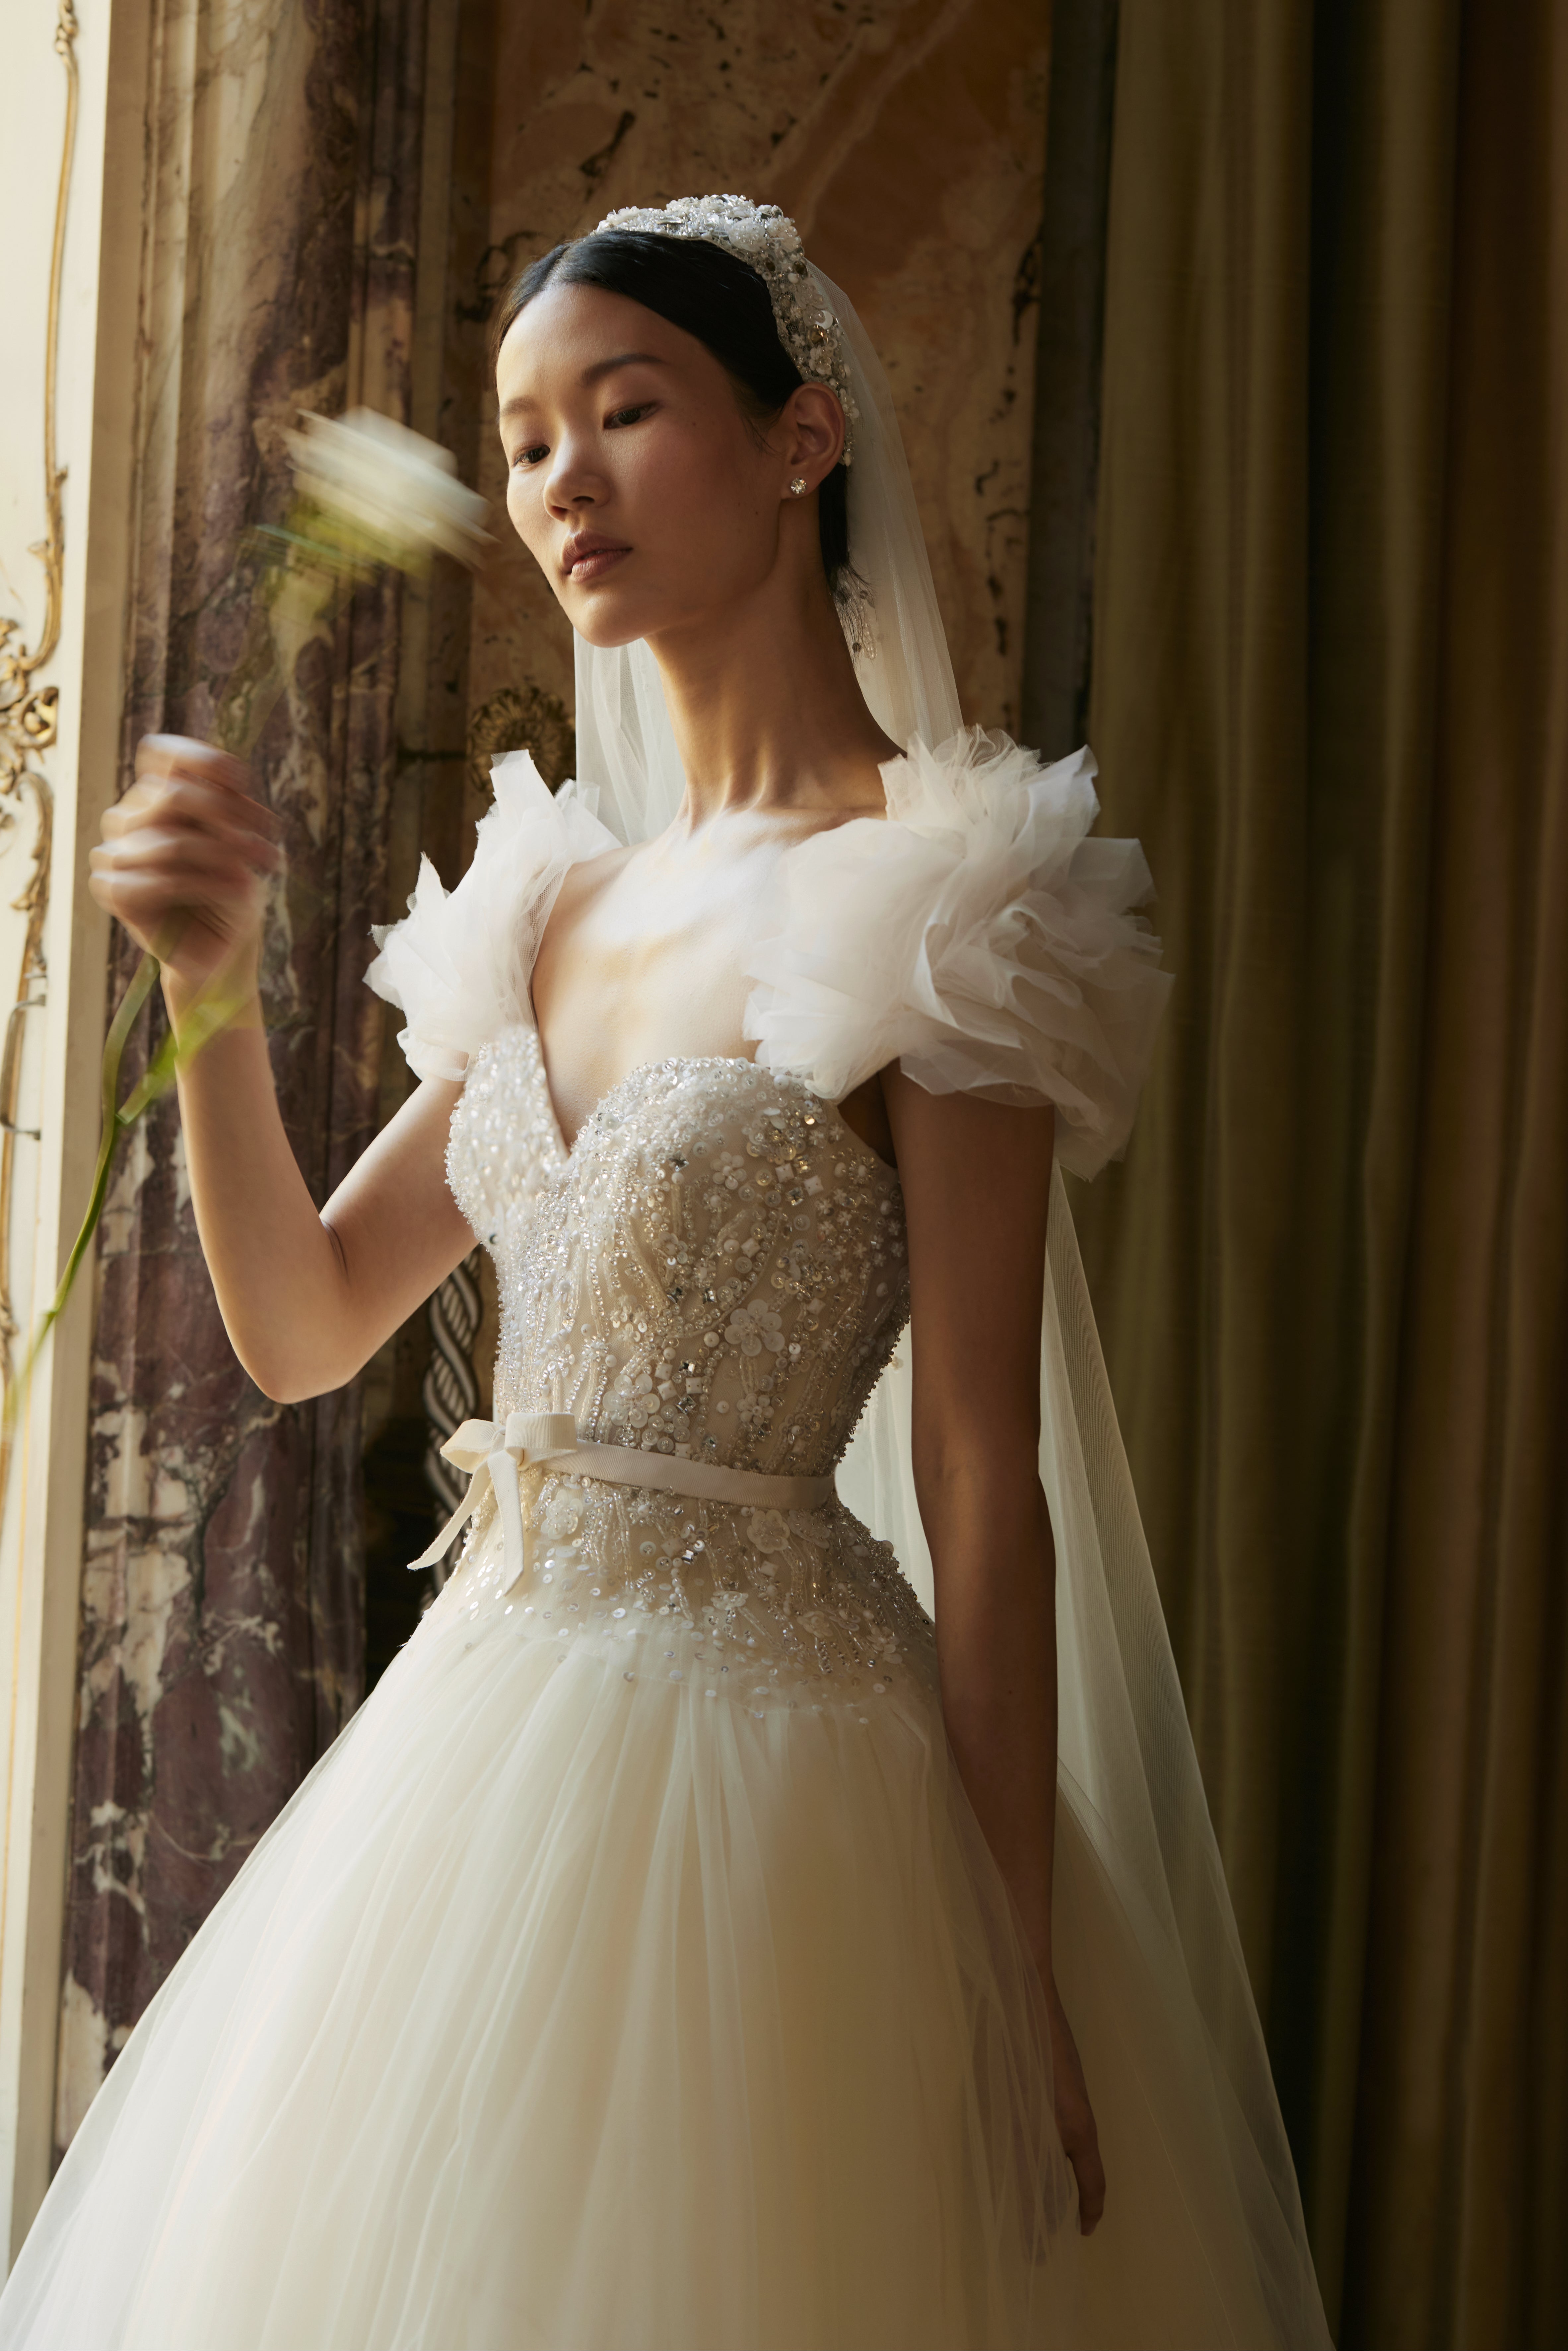 6 Wedding Dress Trends That Will Be Everywhere in 2022